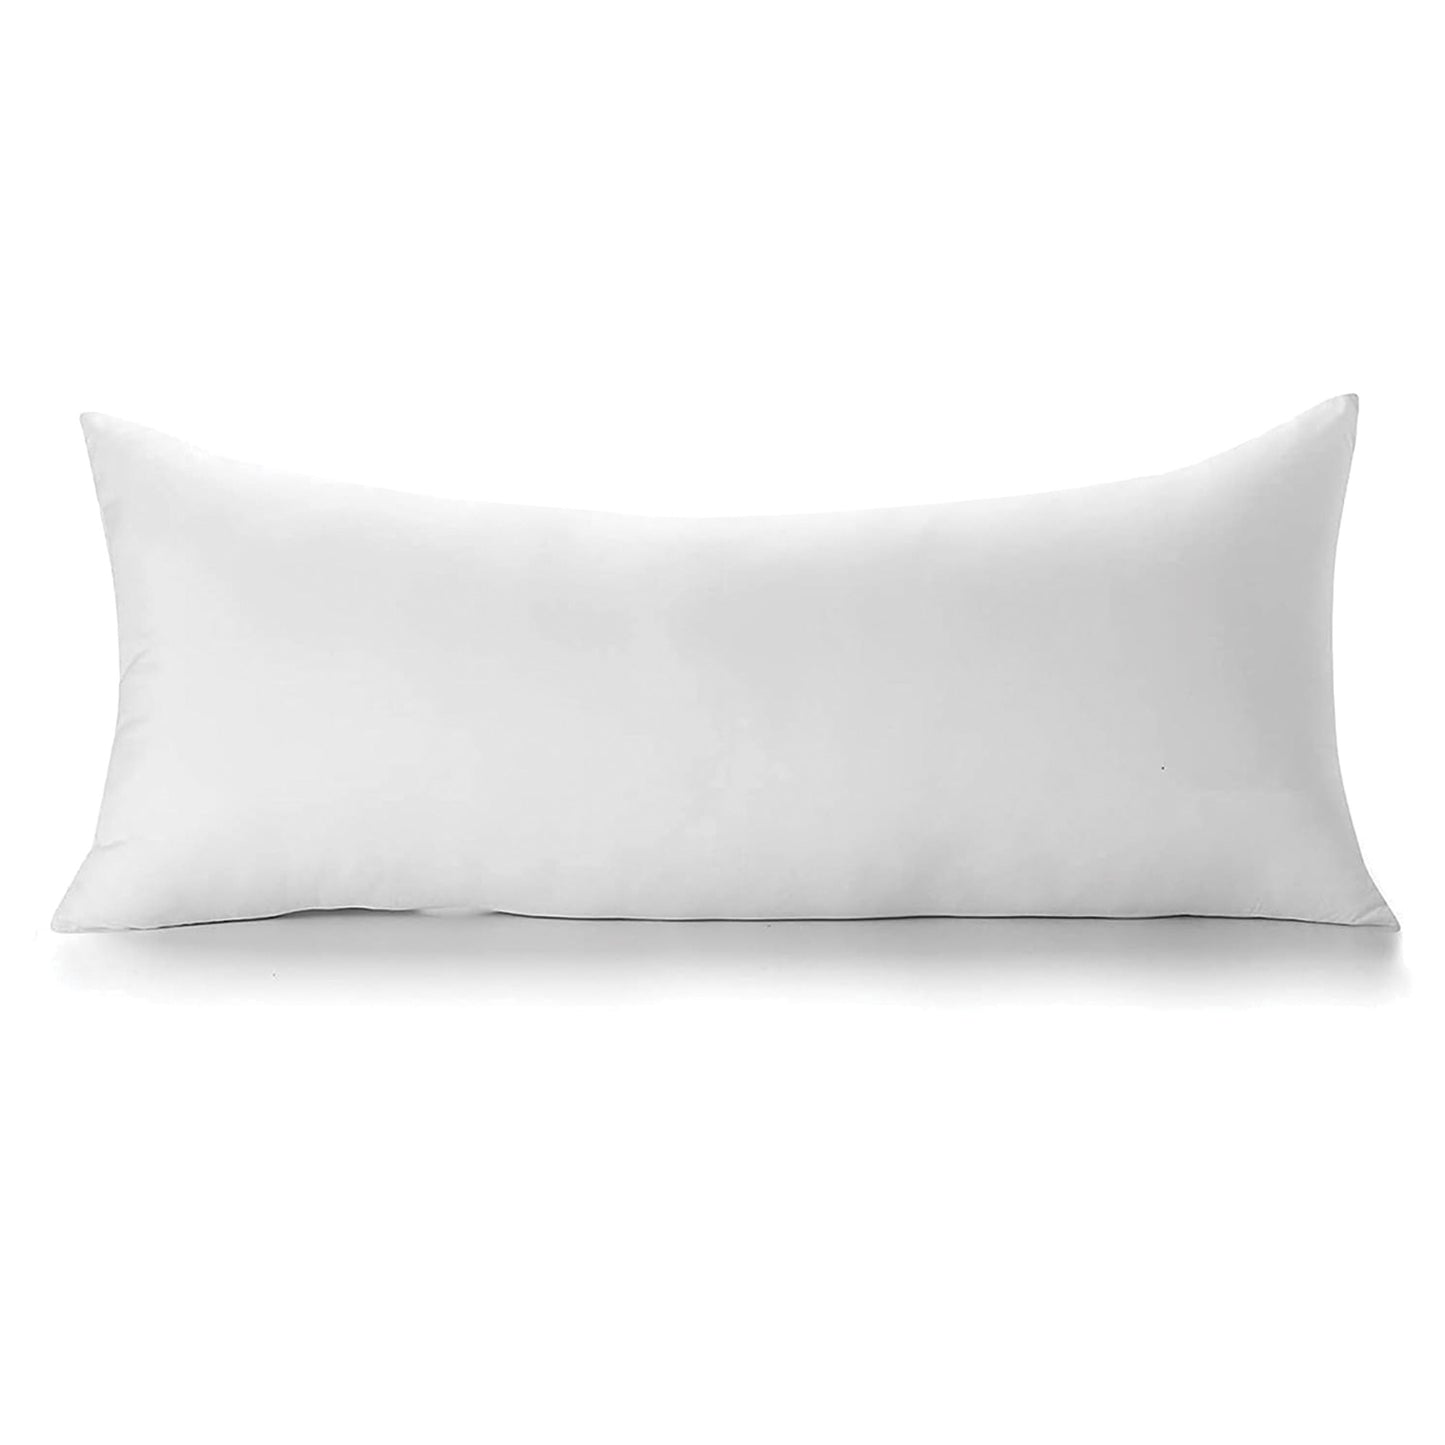 A luxurious body pillow filled with 100% goose down boasting a lofty 600 fill power, offering unparalleled softness and comfort.